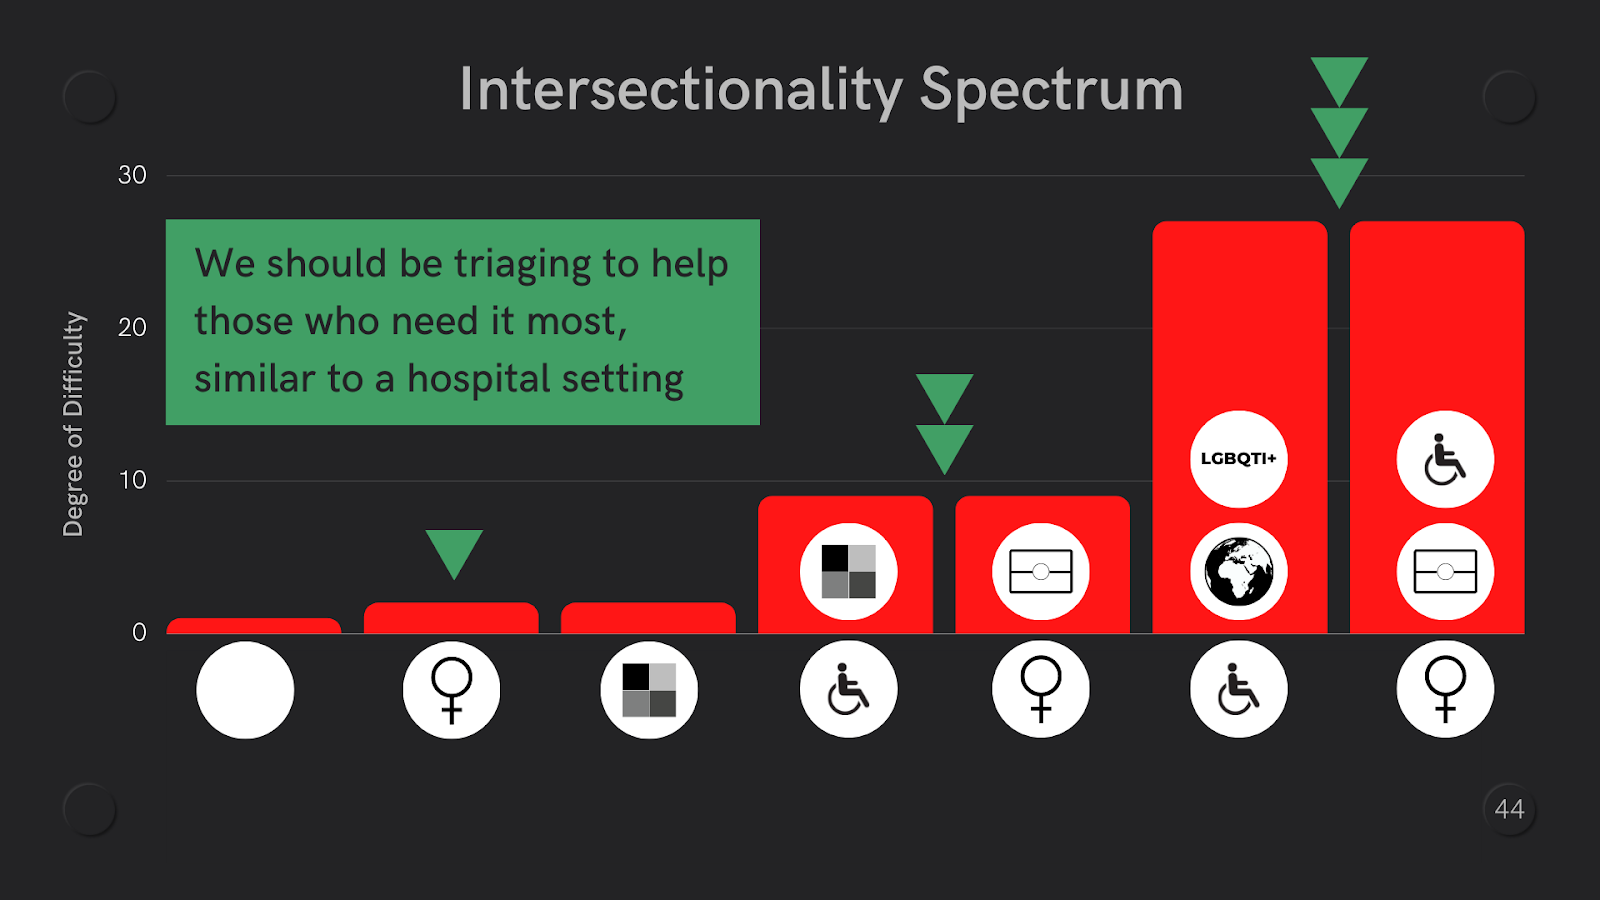 Intersectionality spectrum with different categories of intersectionality along the x-axis and the degree of difficulty shown as a bar graph on the y-axis. It shows 3 arrows pointing down on the bars that have the highest degree of difficulty to signify that we need to prioritise support to those who need it most because they have been discriinated the most. It has one green arrow pointing down to those with smaller degrees of difficulty to signify we still need to help those people as well, but with less intensity or frequency. This is similar to how a hospital should triage patients, in that we need to look after the sickest people first. Please note that every Intersectionality Spectrum has to be contextual. That means that the model isn't fixed, it is highly contextual and created to fit the situation you are focusing on.